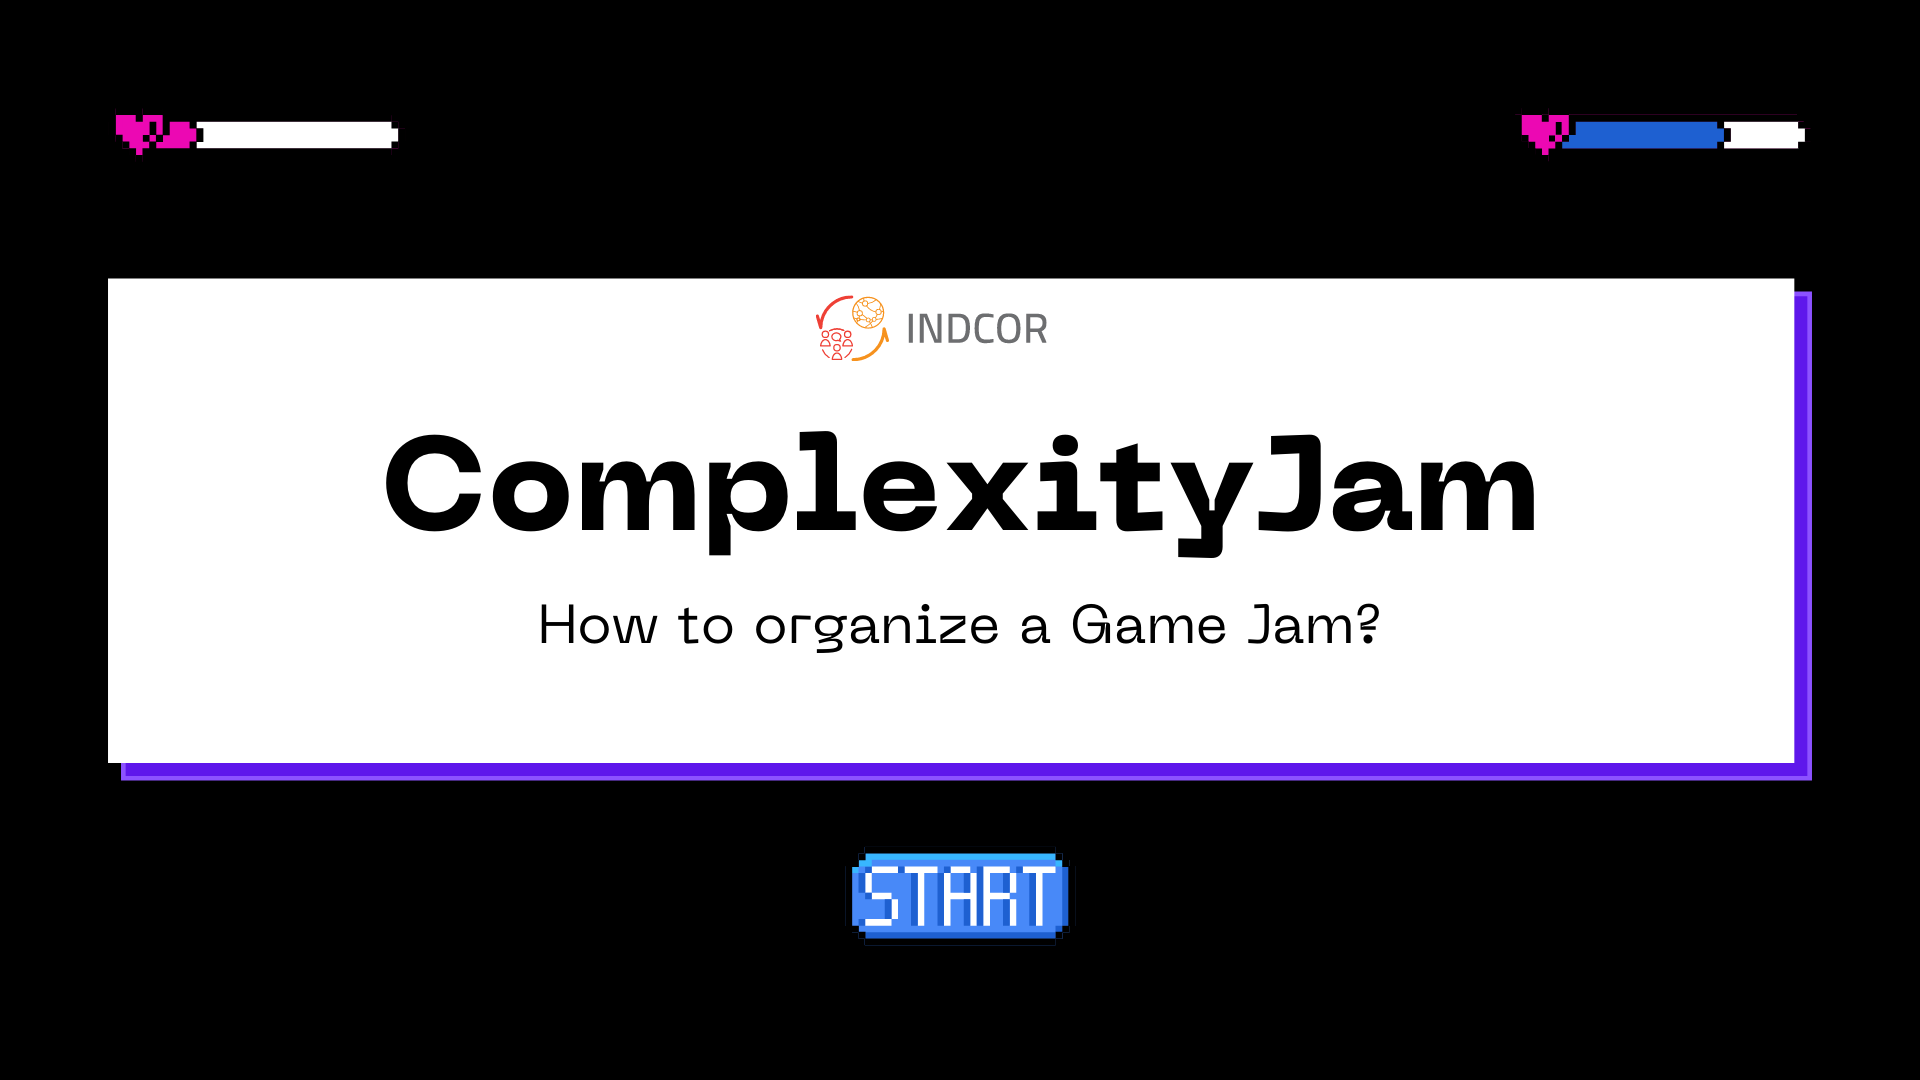 How to Organize a Game Jam